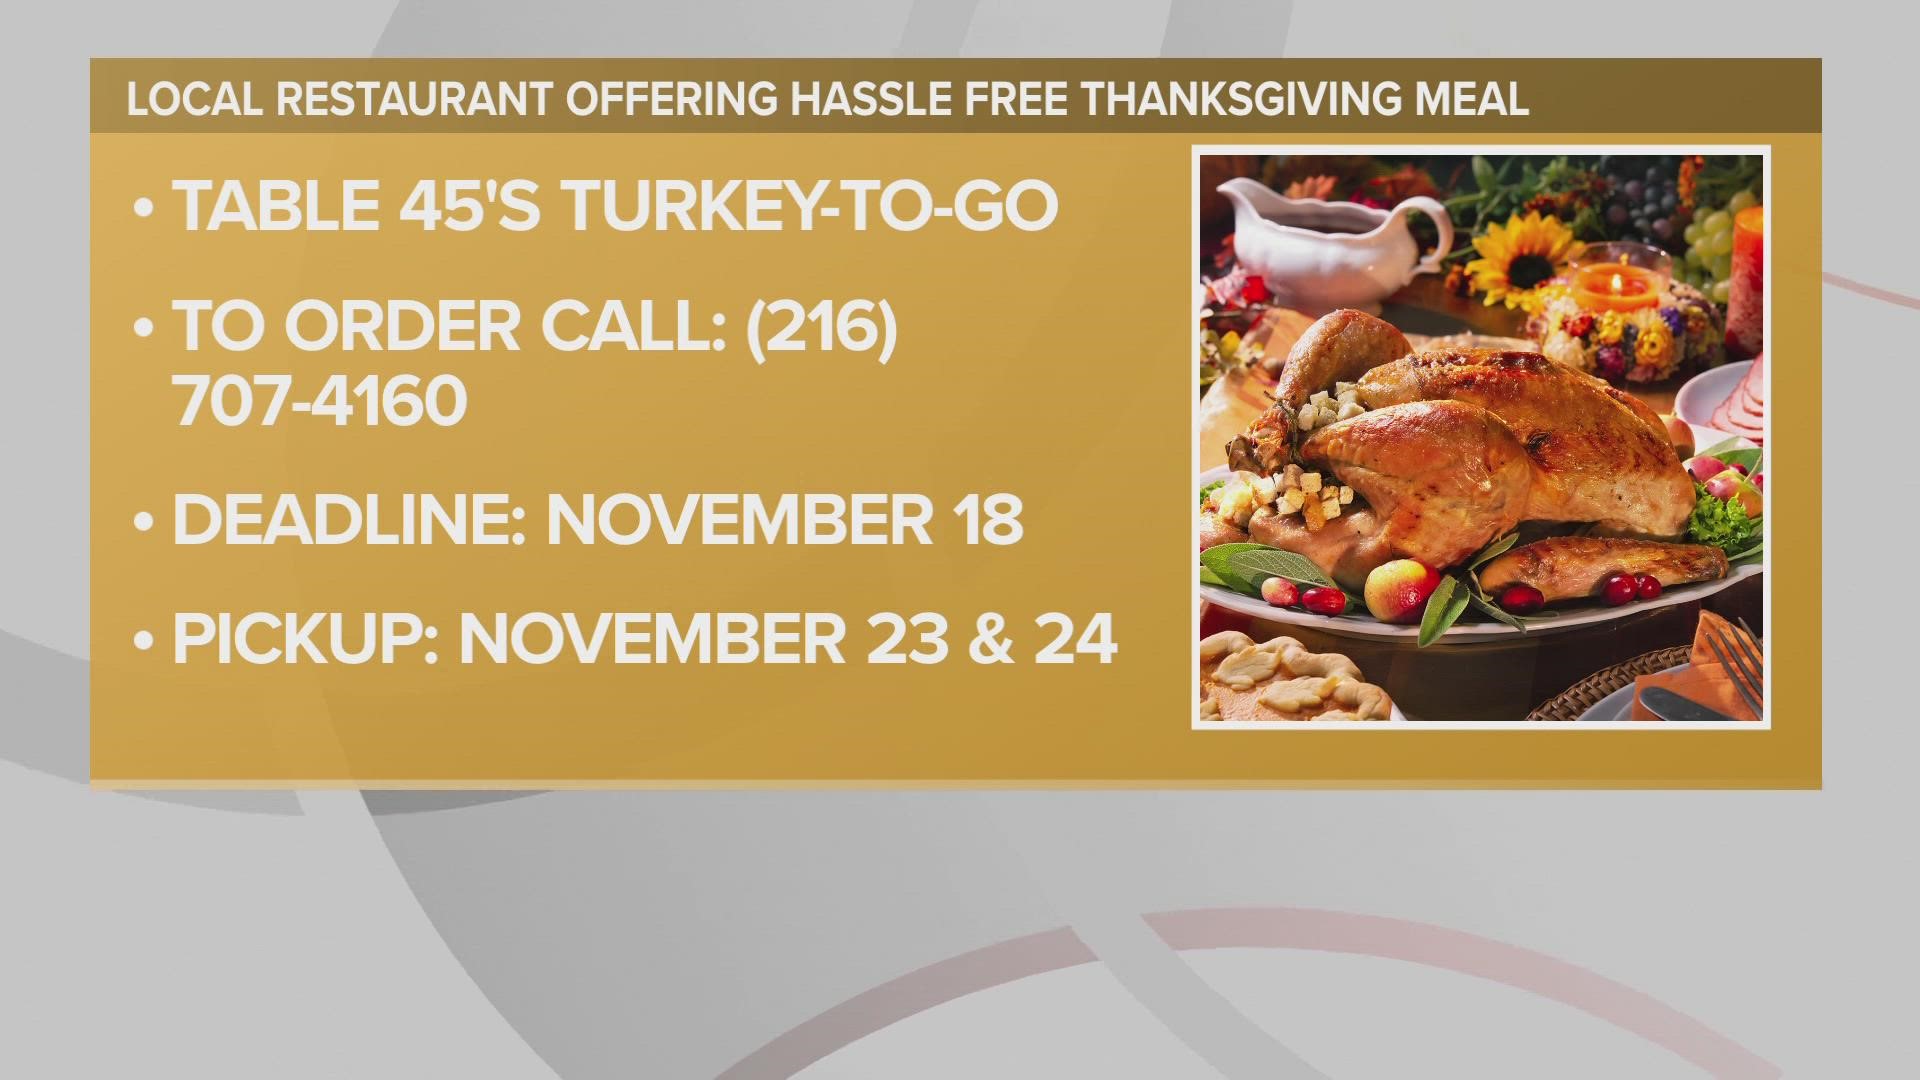 3News' Kierra Cotton visited Table 45 at the InterContinental Cleveland. Table 45 is offering Thanksgiving turkey and meals to go this year.